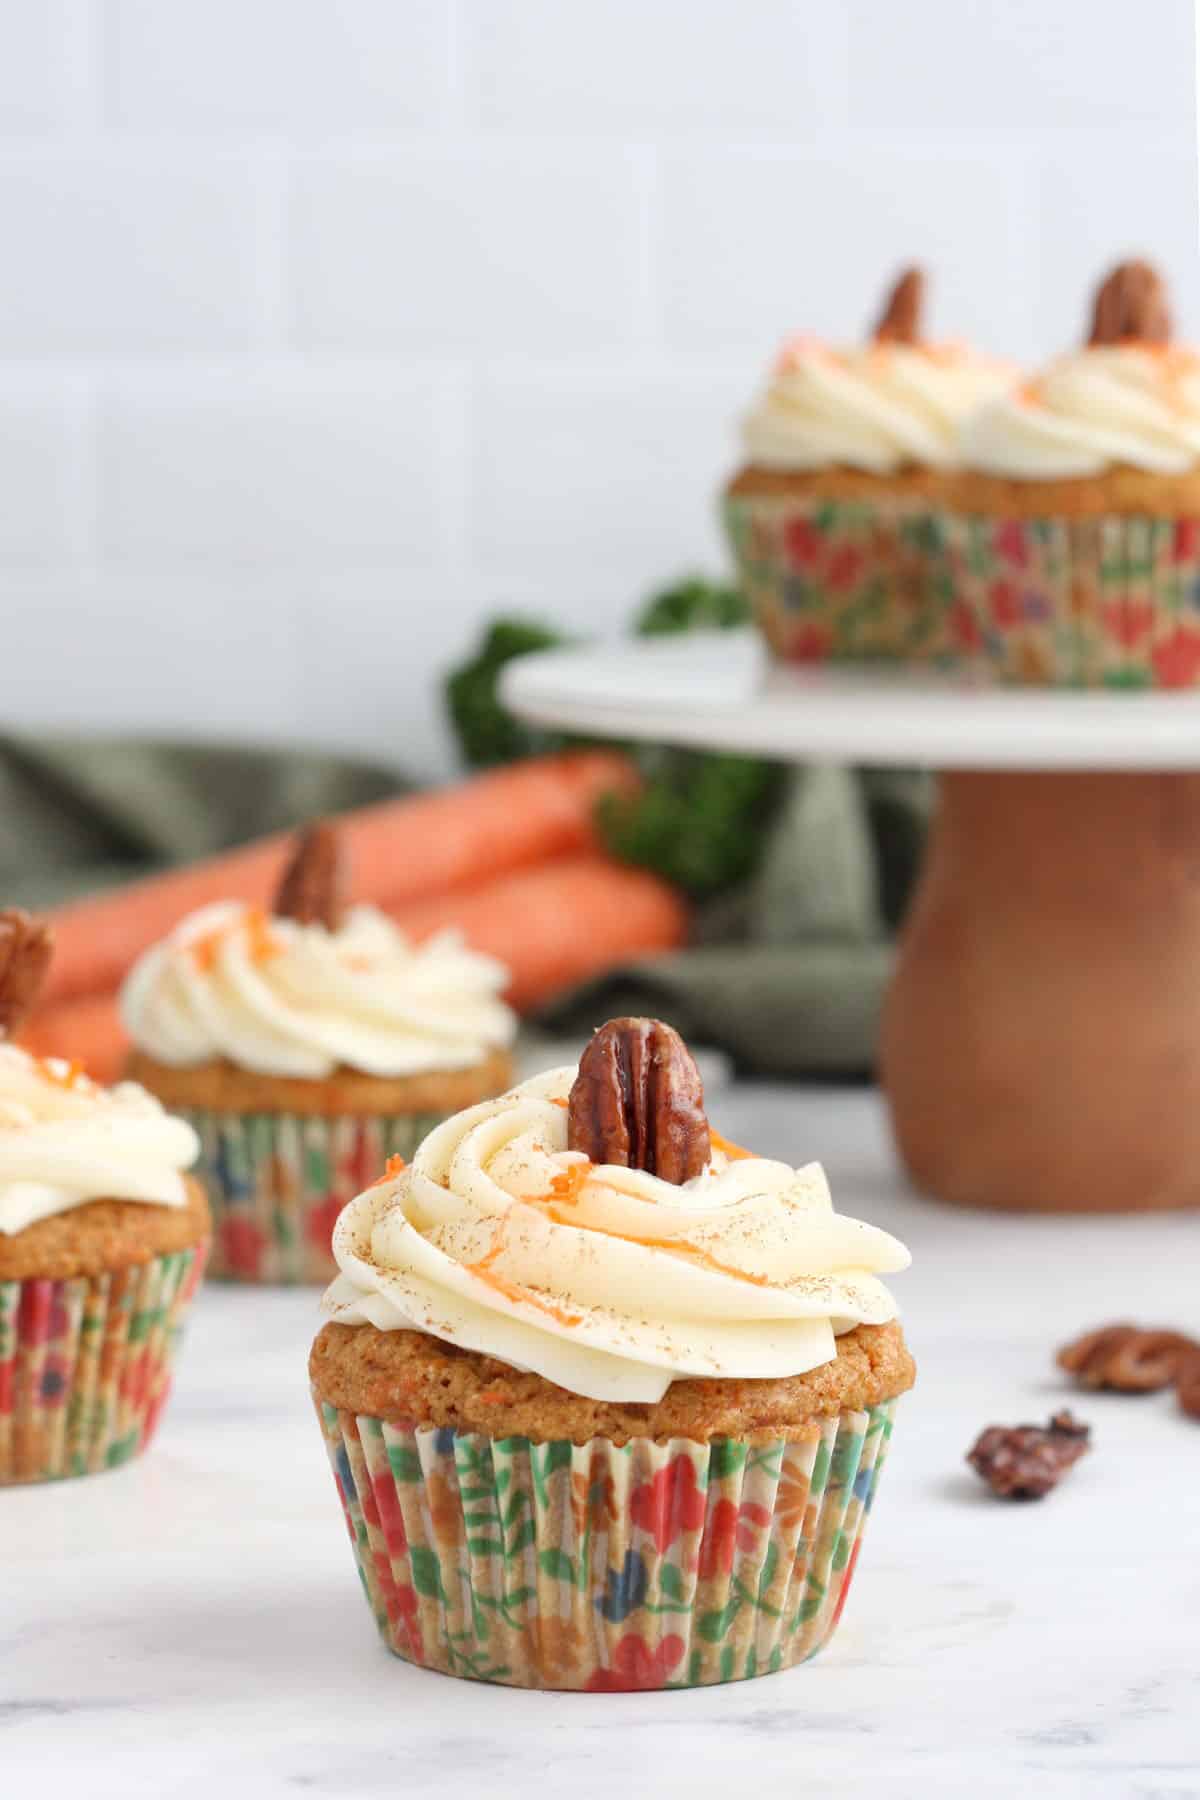 Carrot cake cupcake topped with cream cheese frosting and glazed pecan nuts